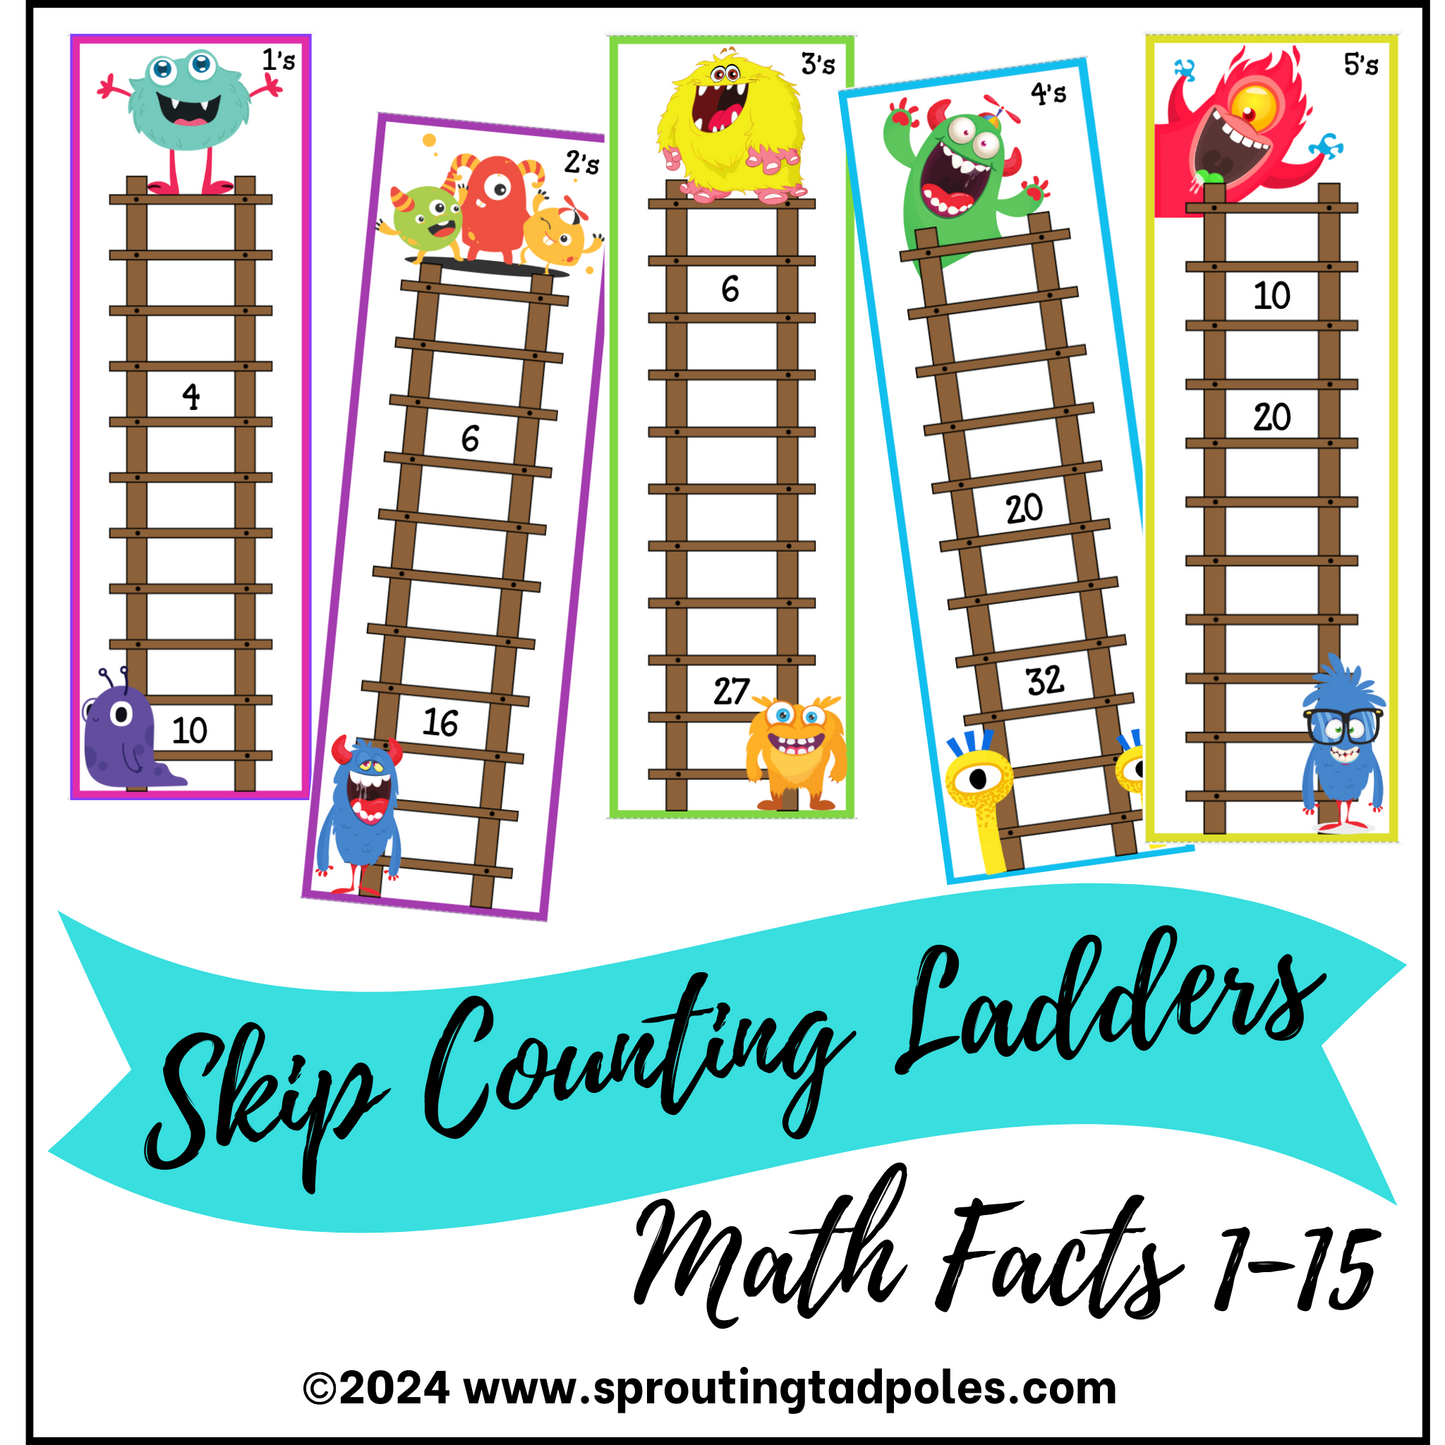 Multiplication Facts 1-15 Skip Counting Games - PHYSICAL & DIGITAL VERSION